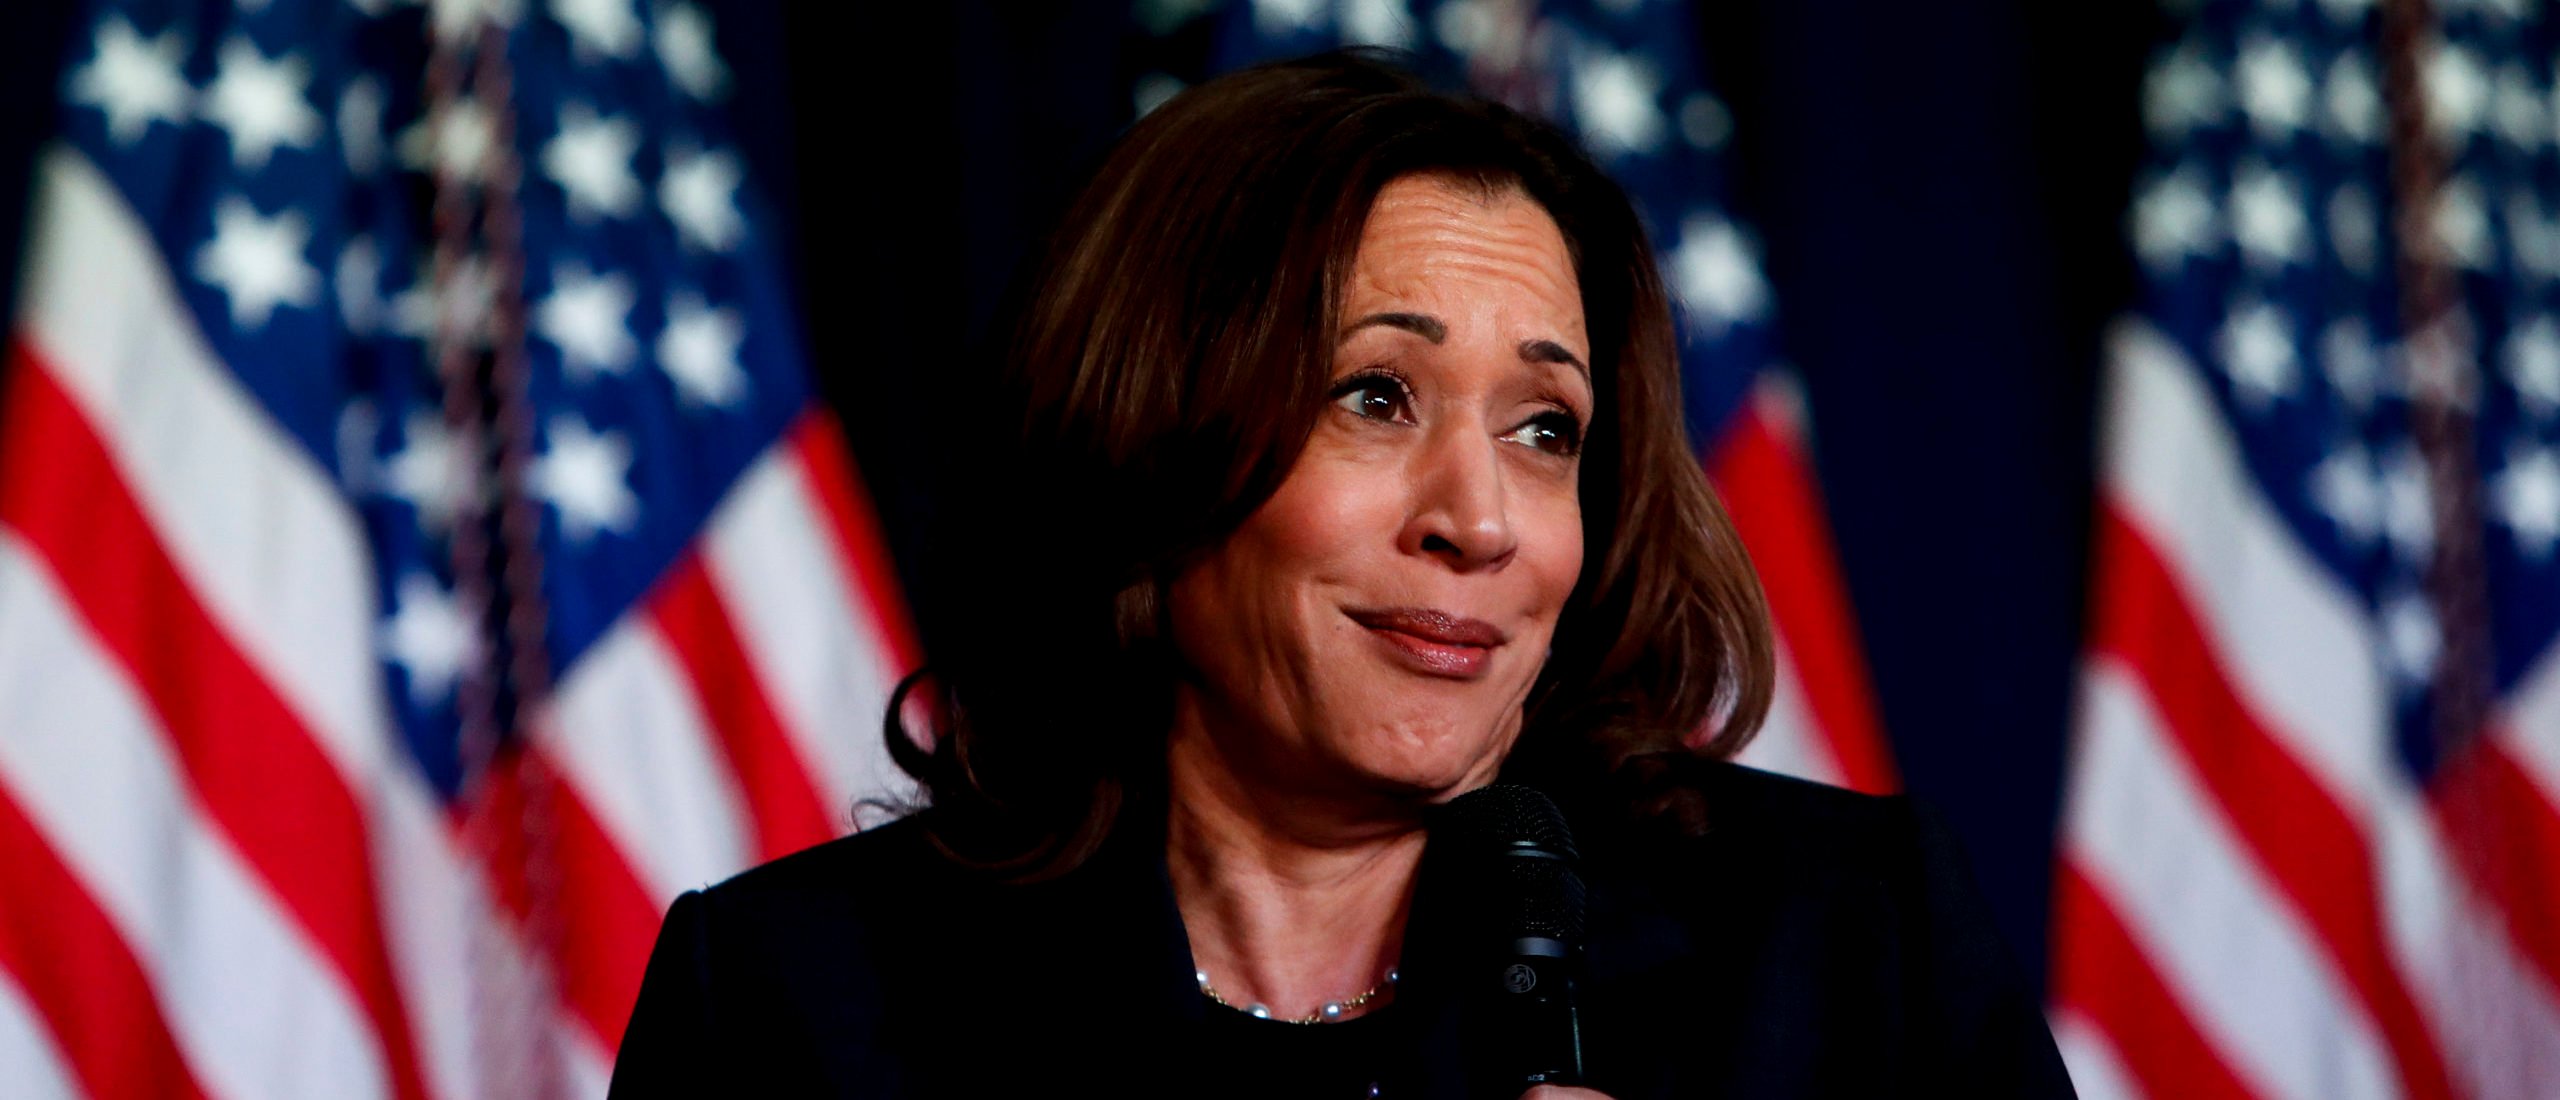 Fact check: The video circulating online is not the first presidential ad for Kamala Harris